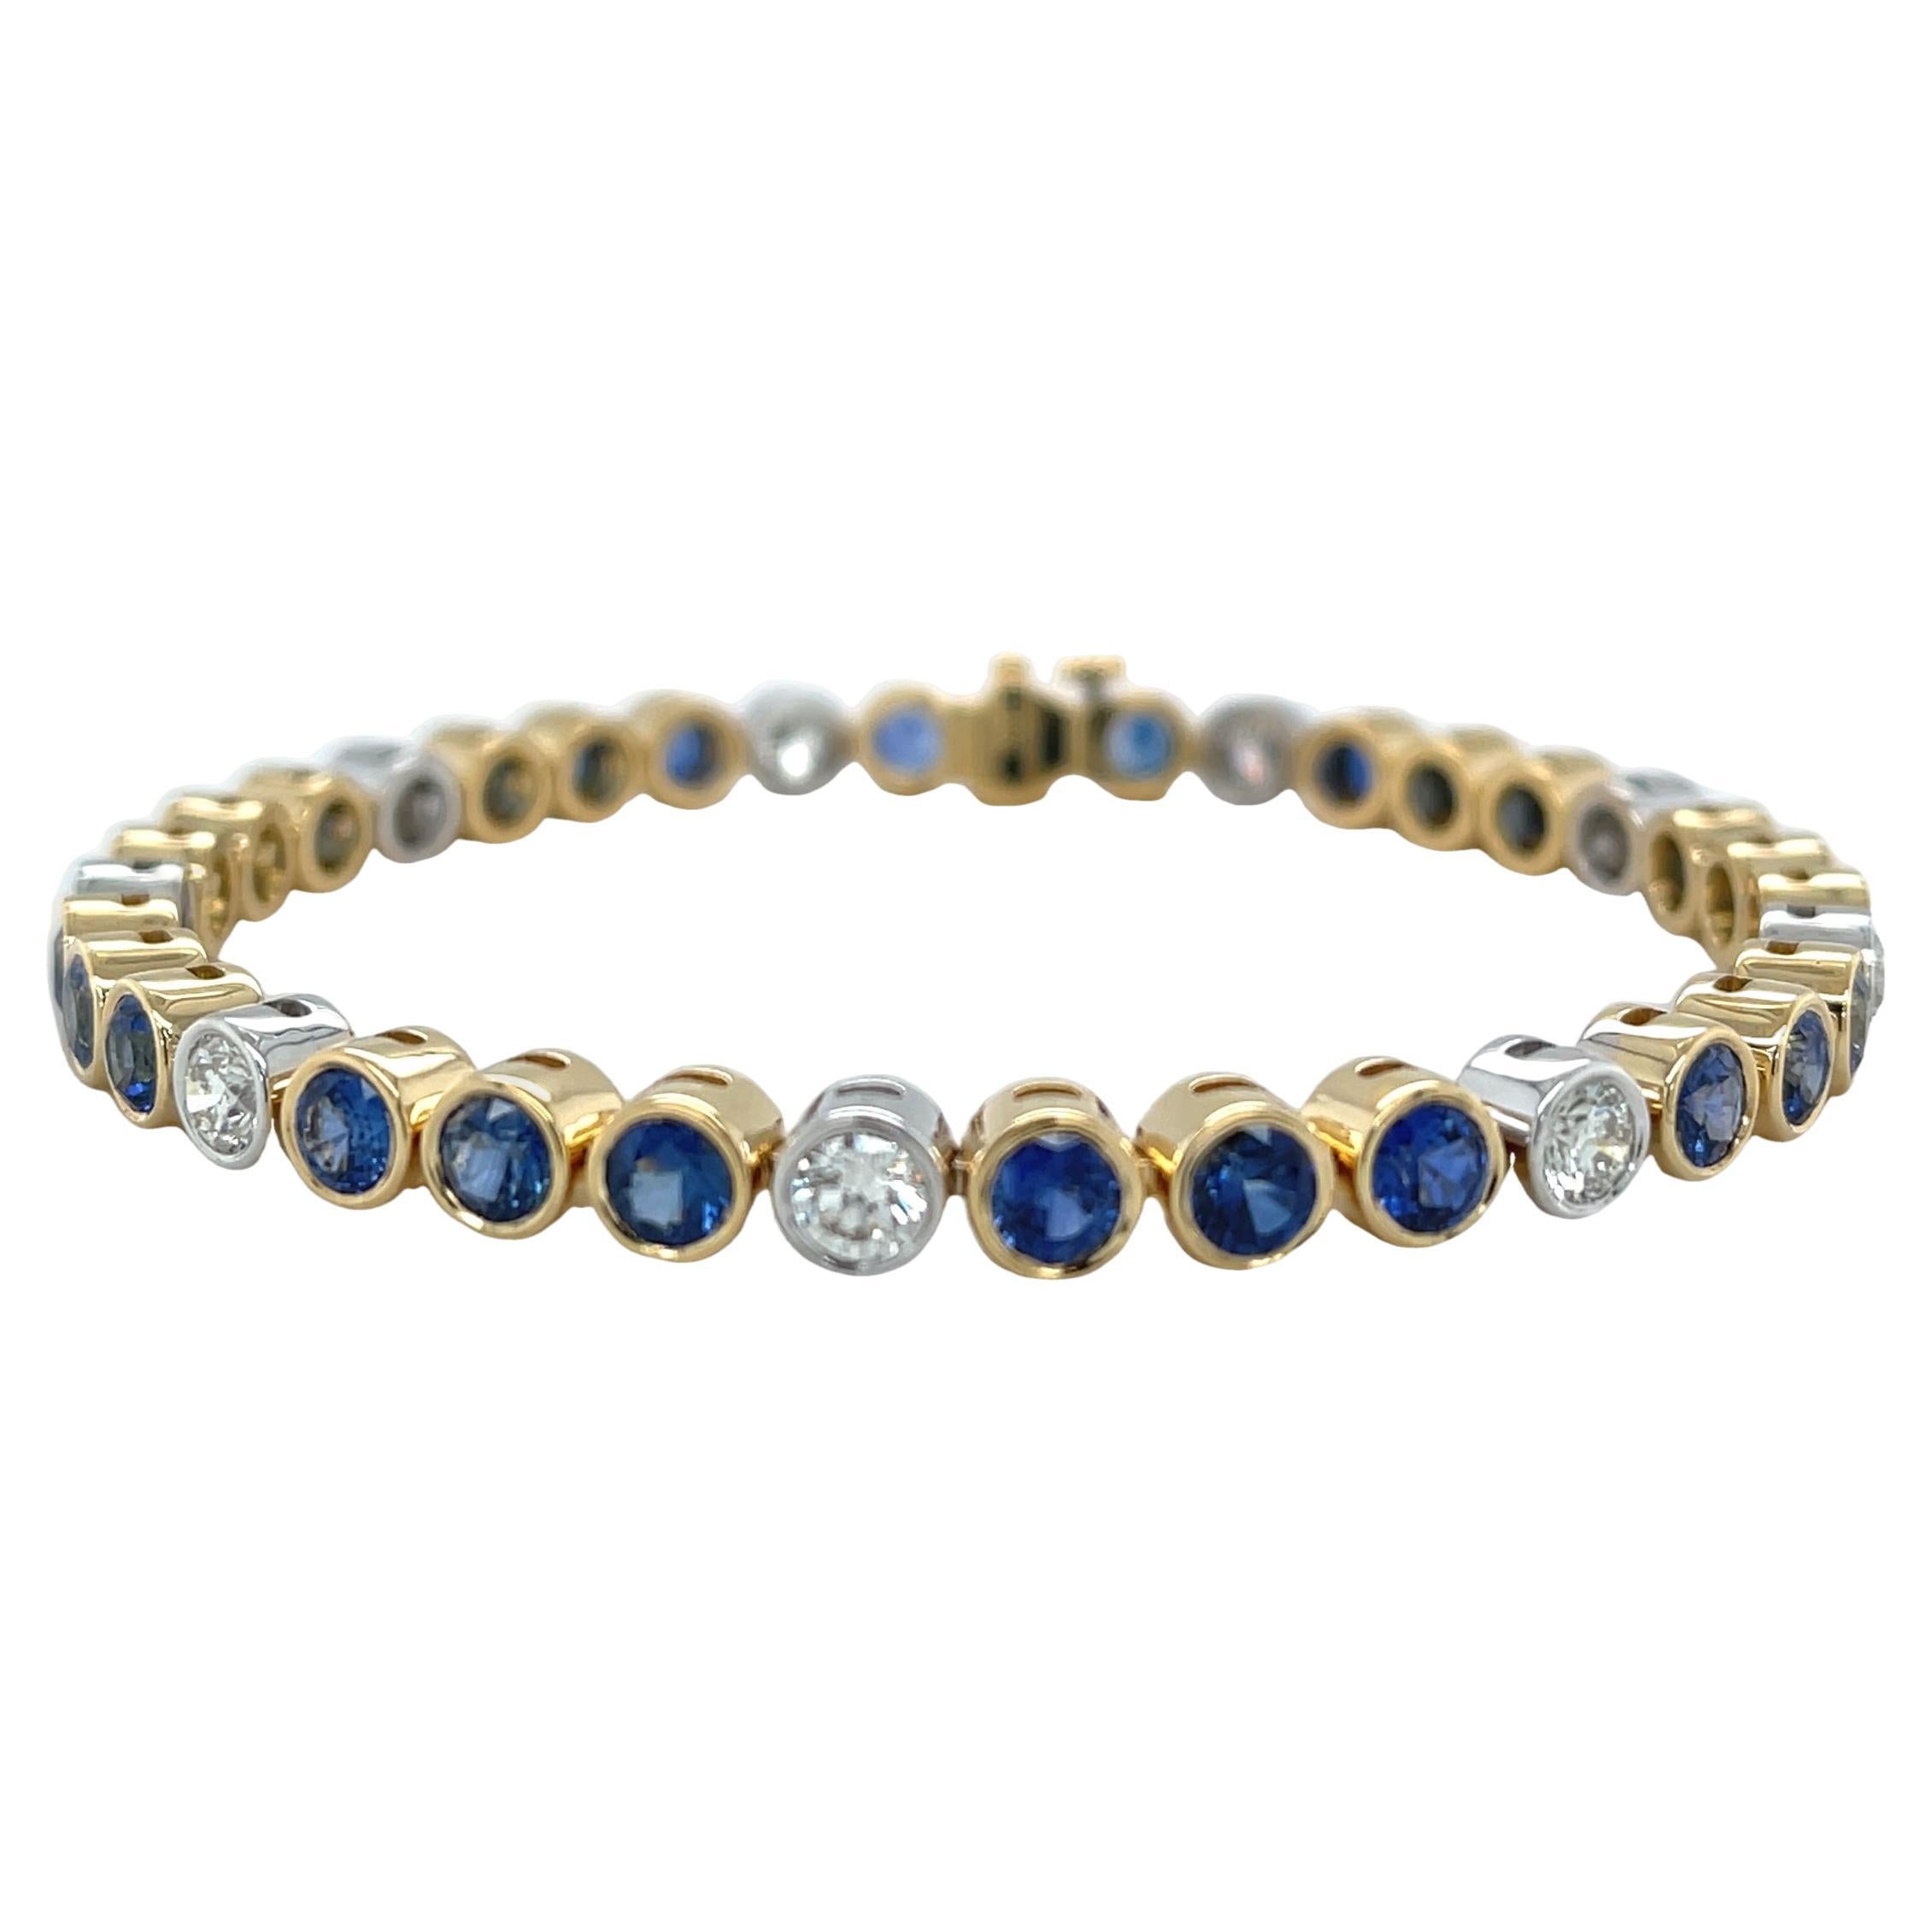  Blue Sapphire and Diamond Tennis Bracelet in 18k Gold, 7.49 Carats Total